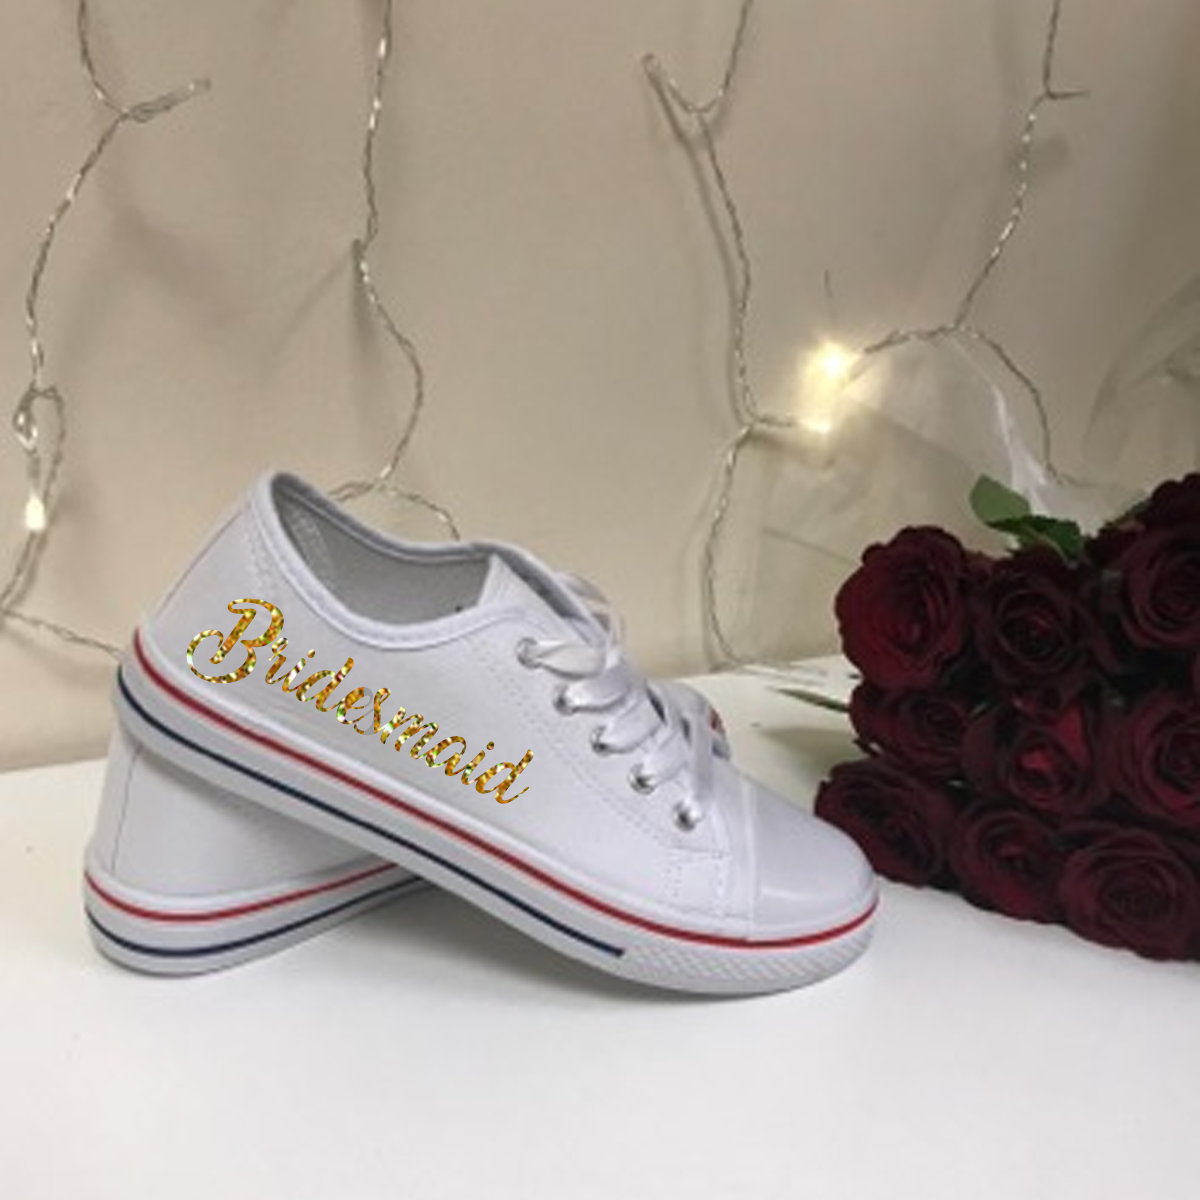 Personalised White Canvas Wedding Shoes - Wedding Party